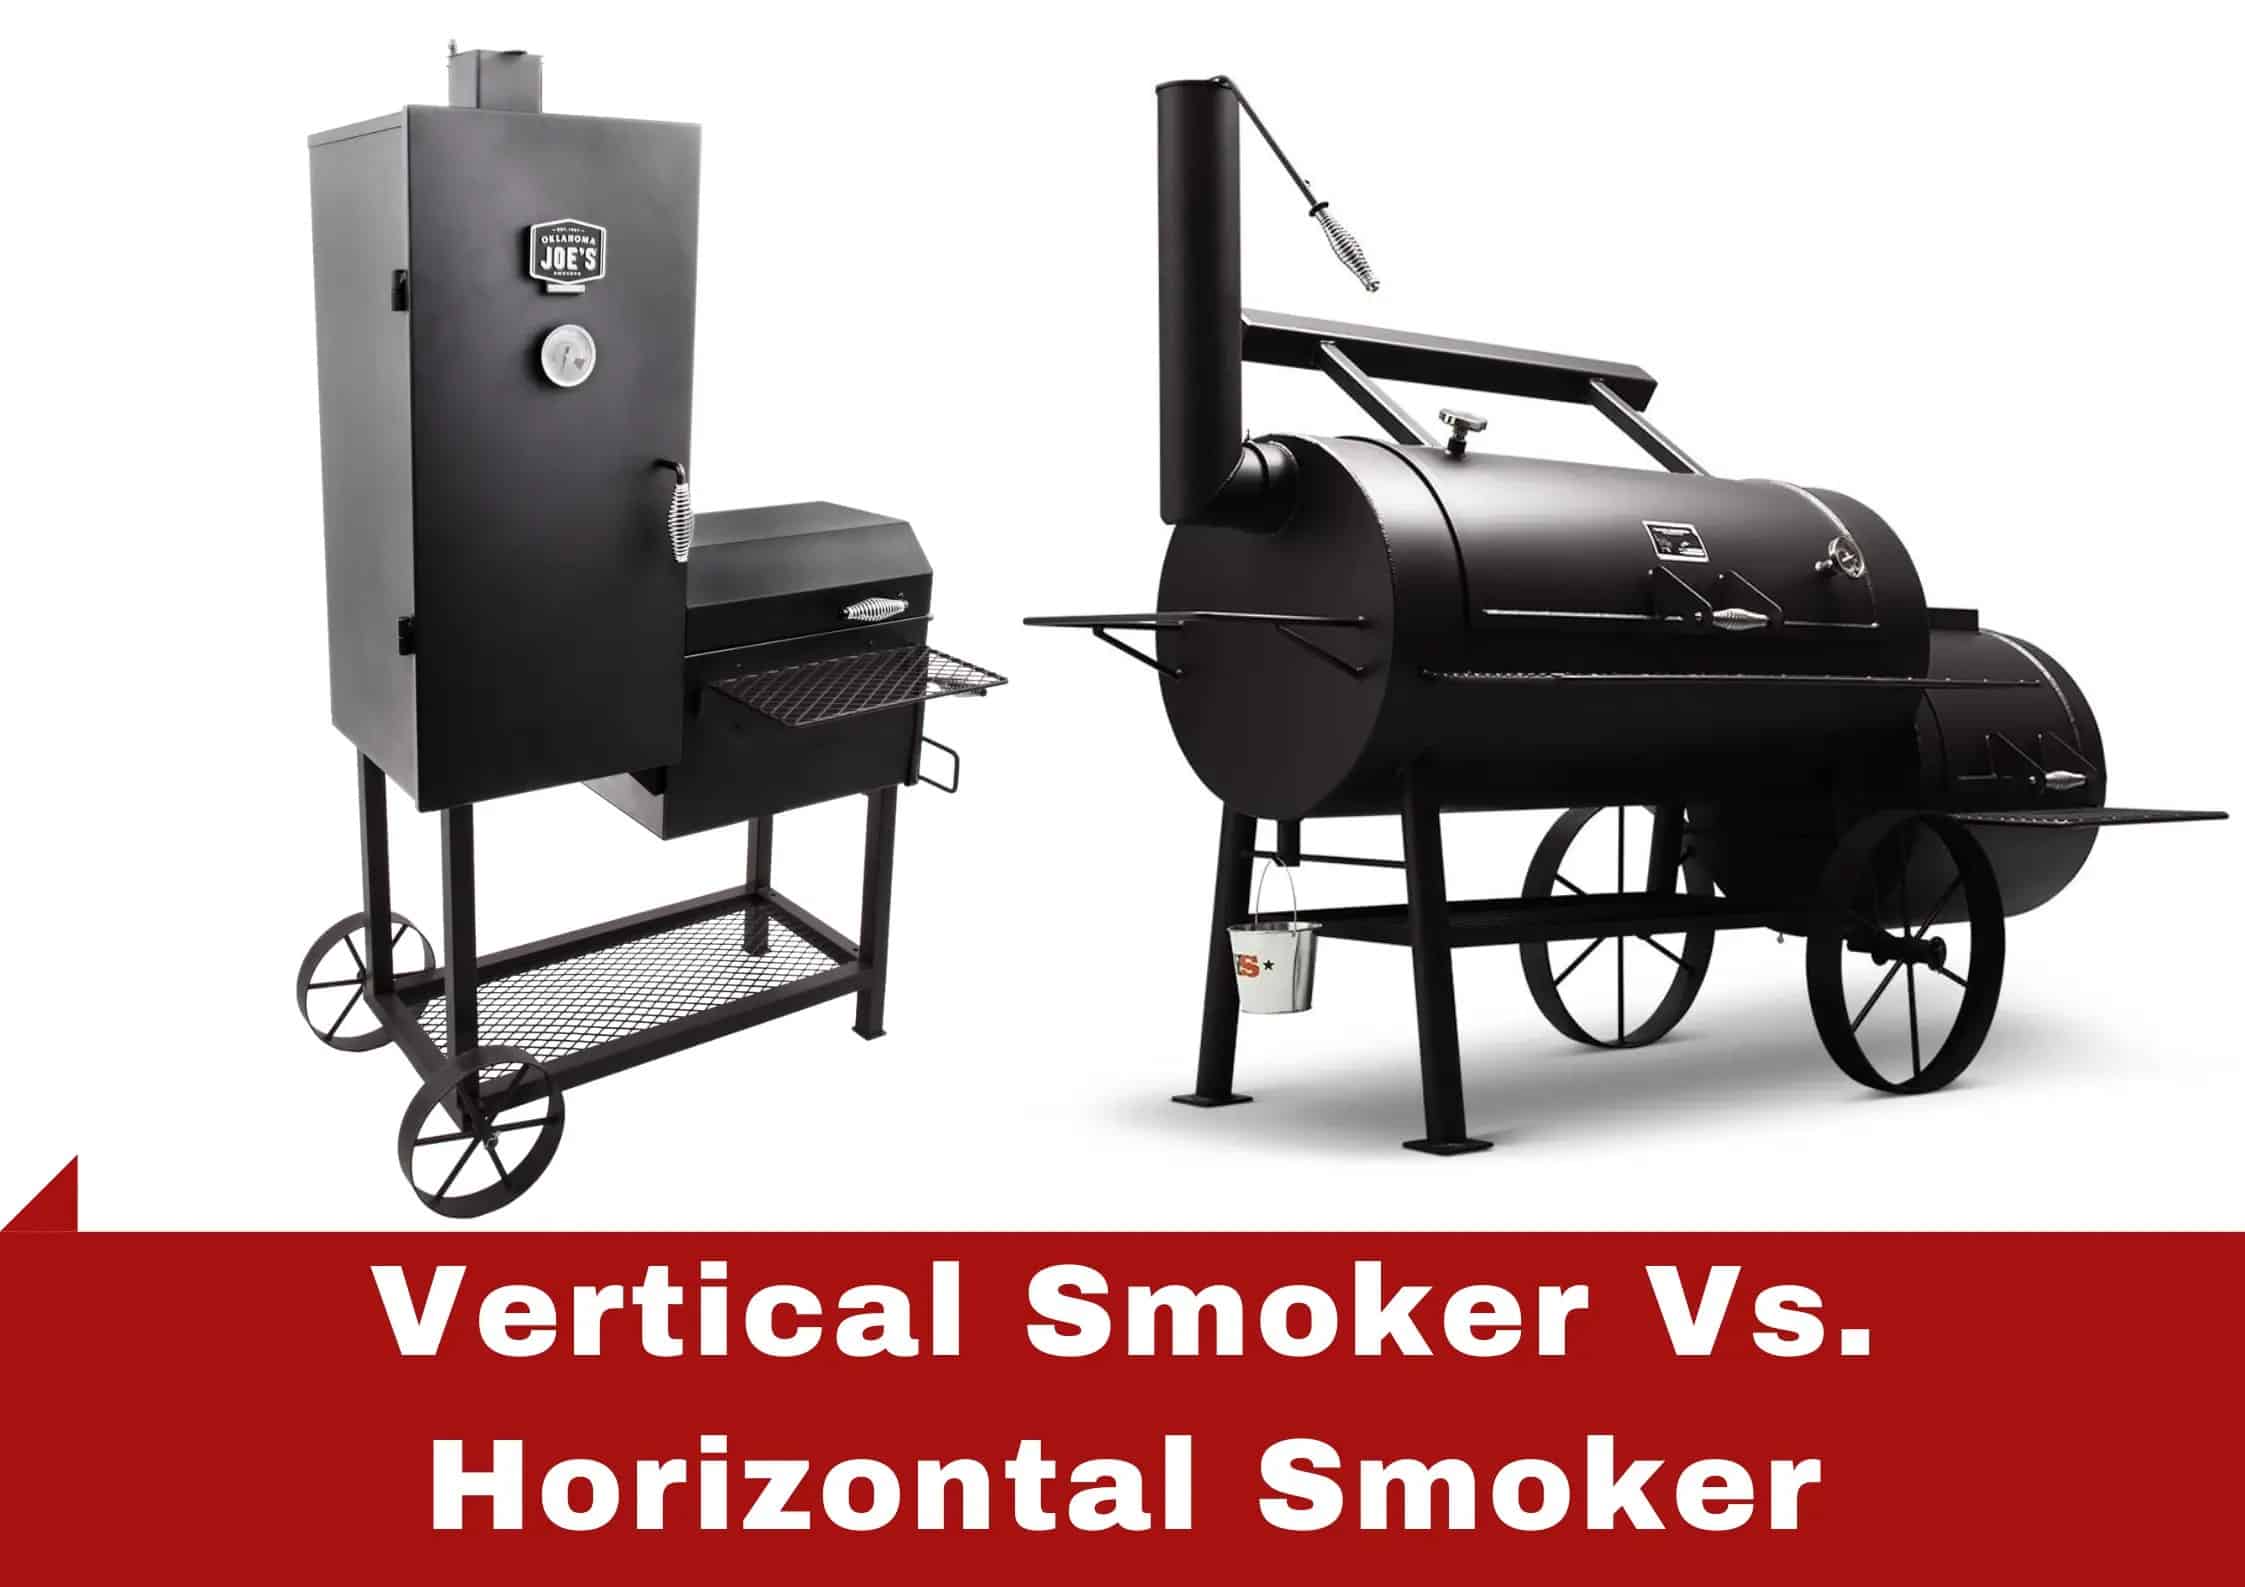 Vertical vs Horizontal Smoker: Which Is Right For You?